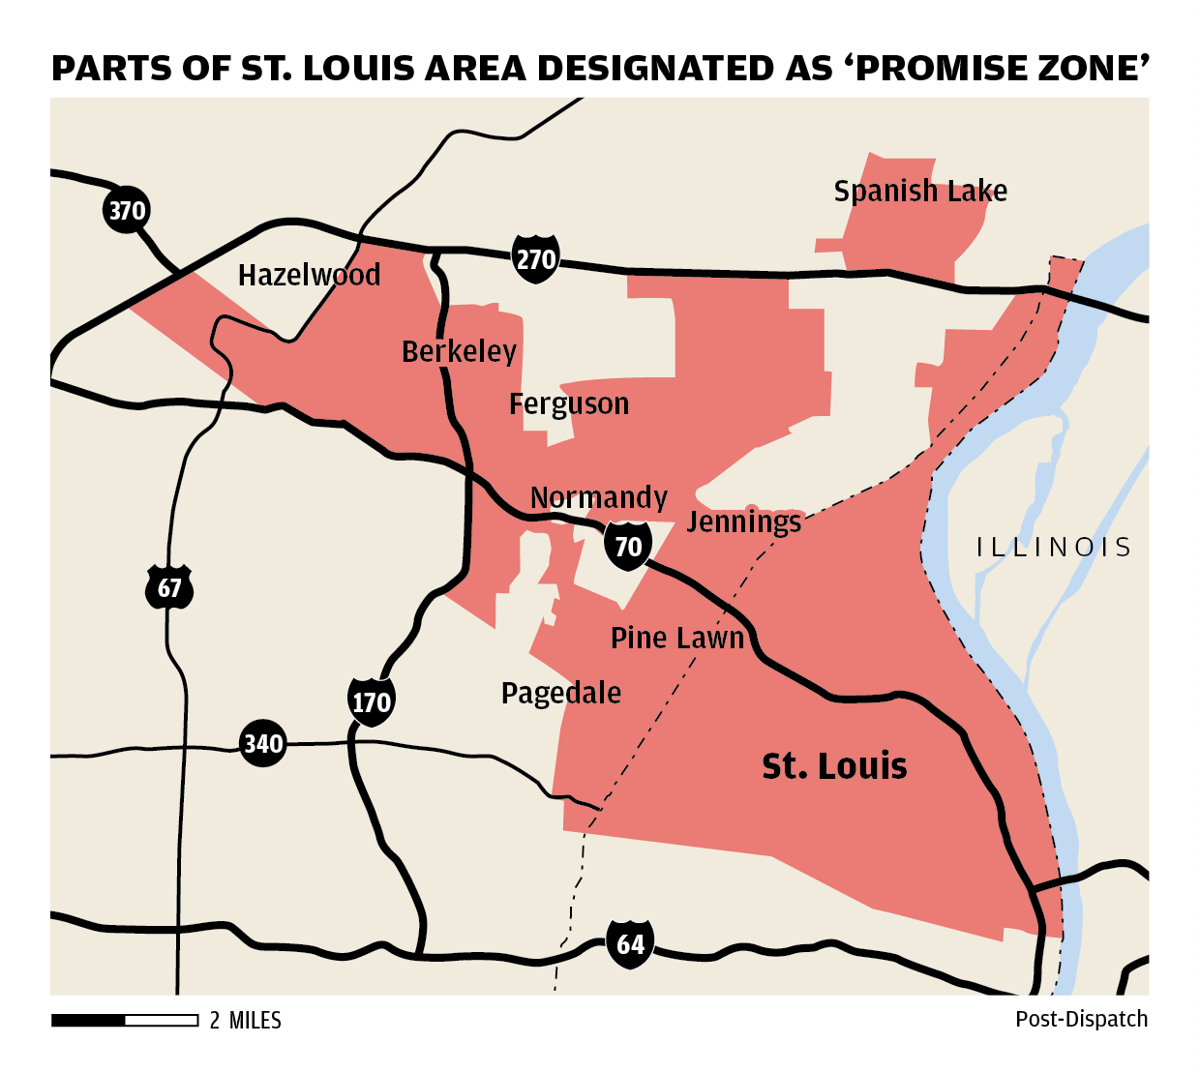 &#39;Promise Zone&#39; designation puts St. Louis in line for federal aid | Metro | www.neverfullbag.com